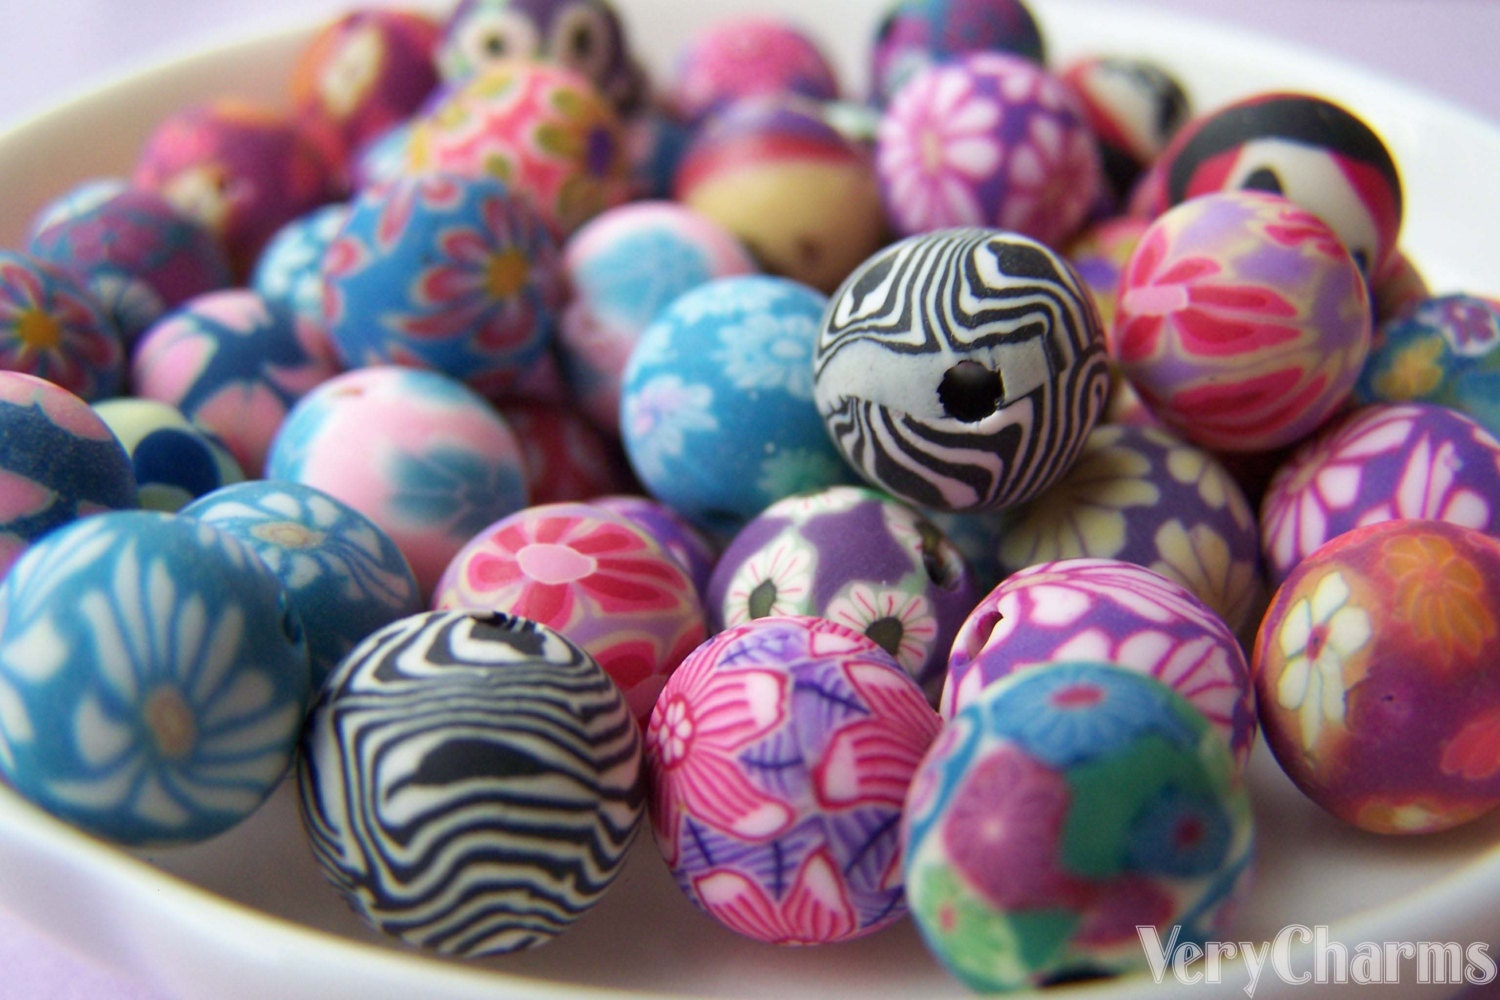 Flower Polymer Clay Beads Mix / Assorted Beads (8mm / Round